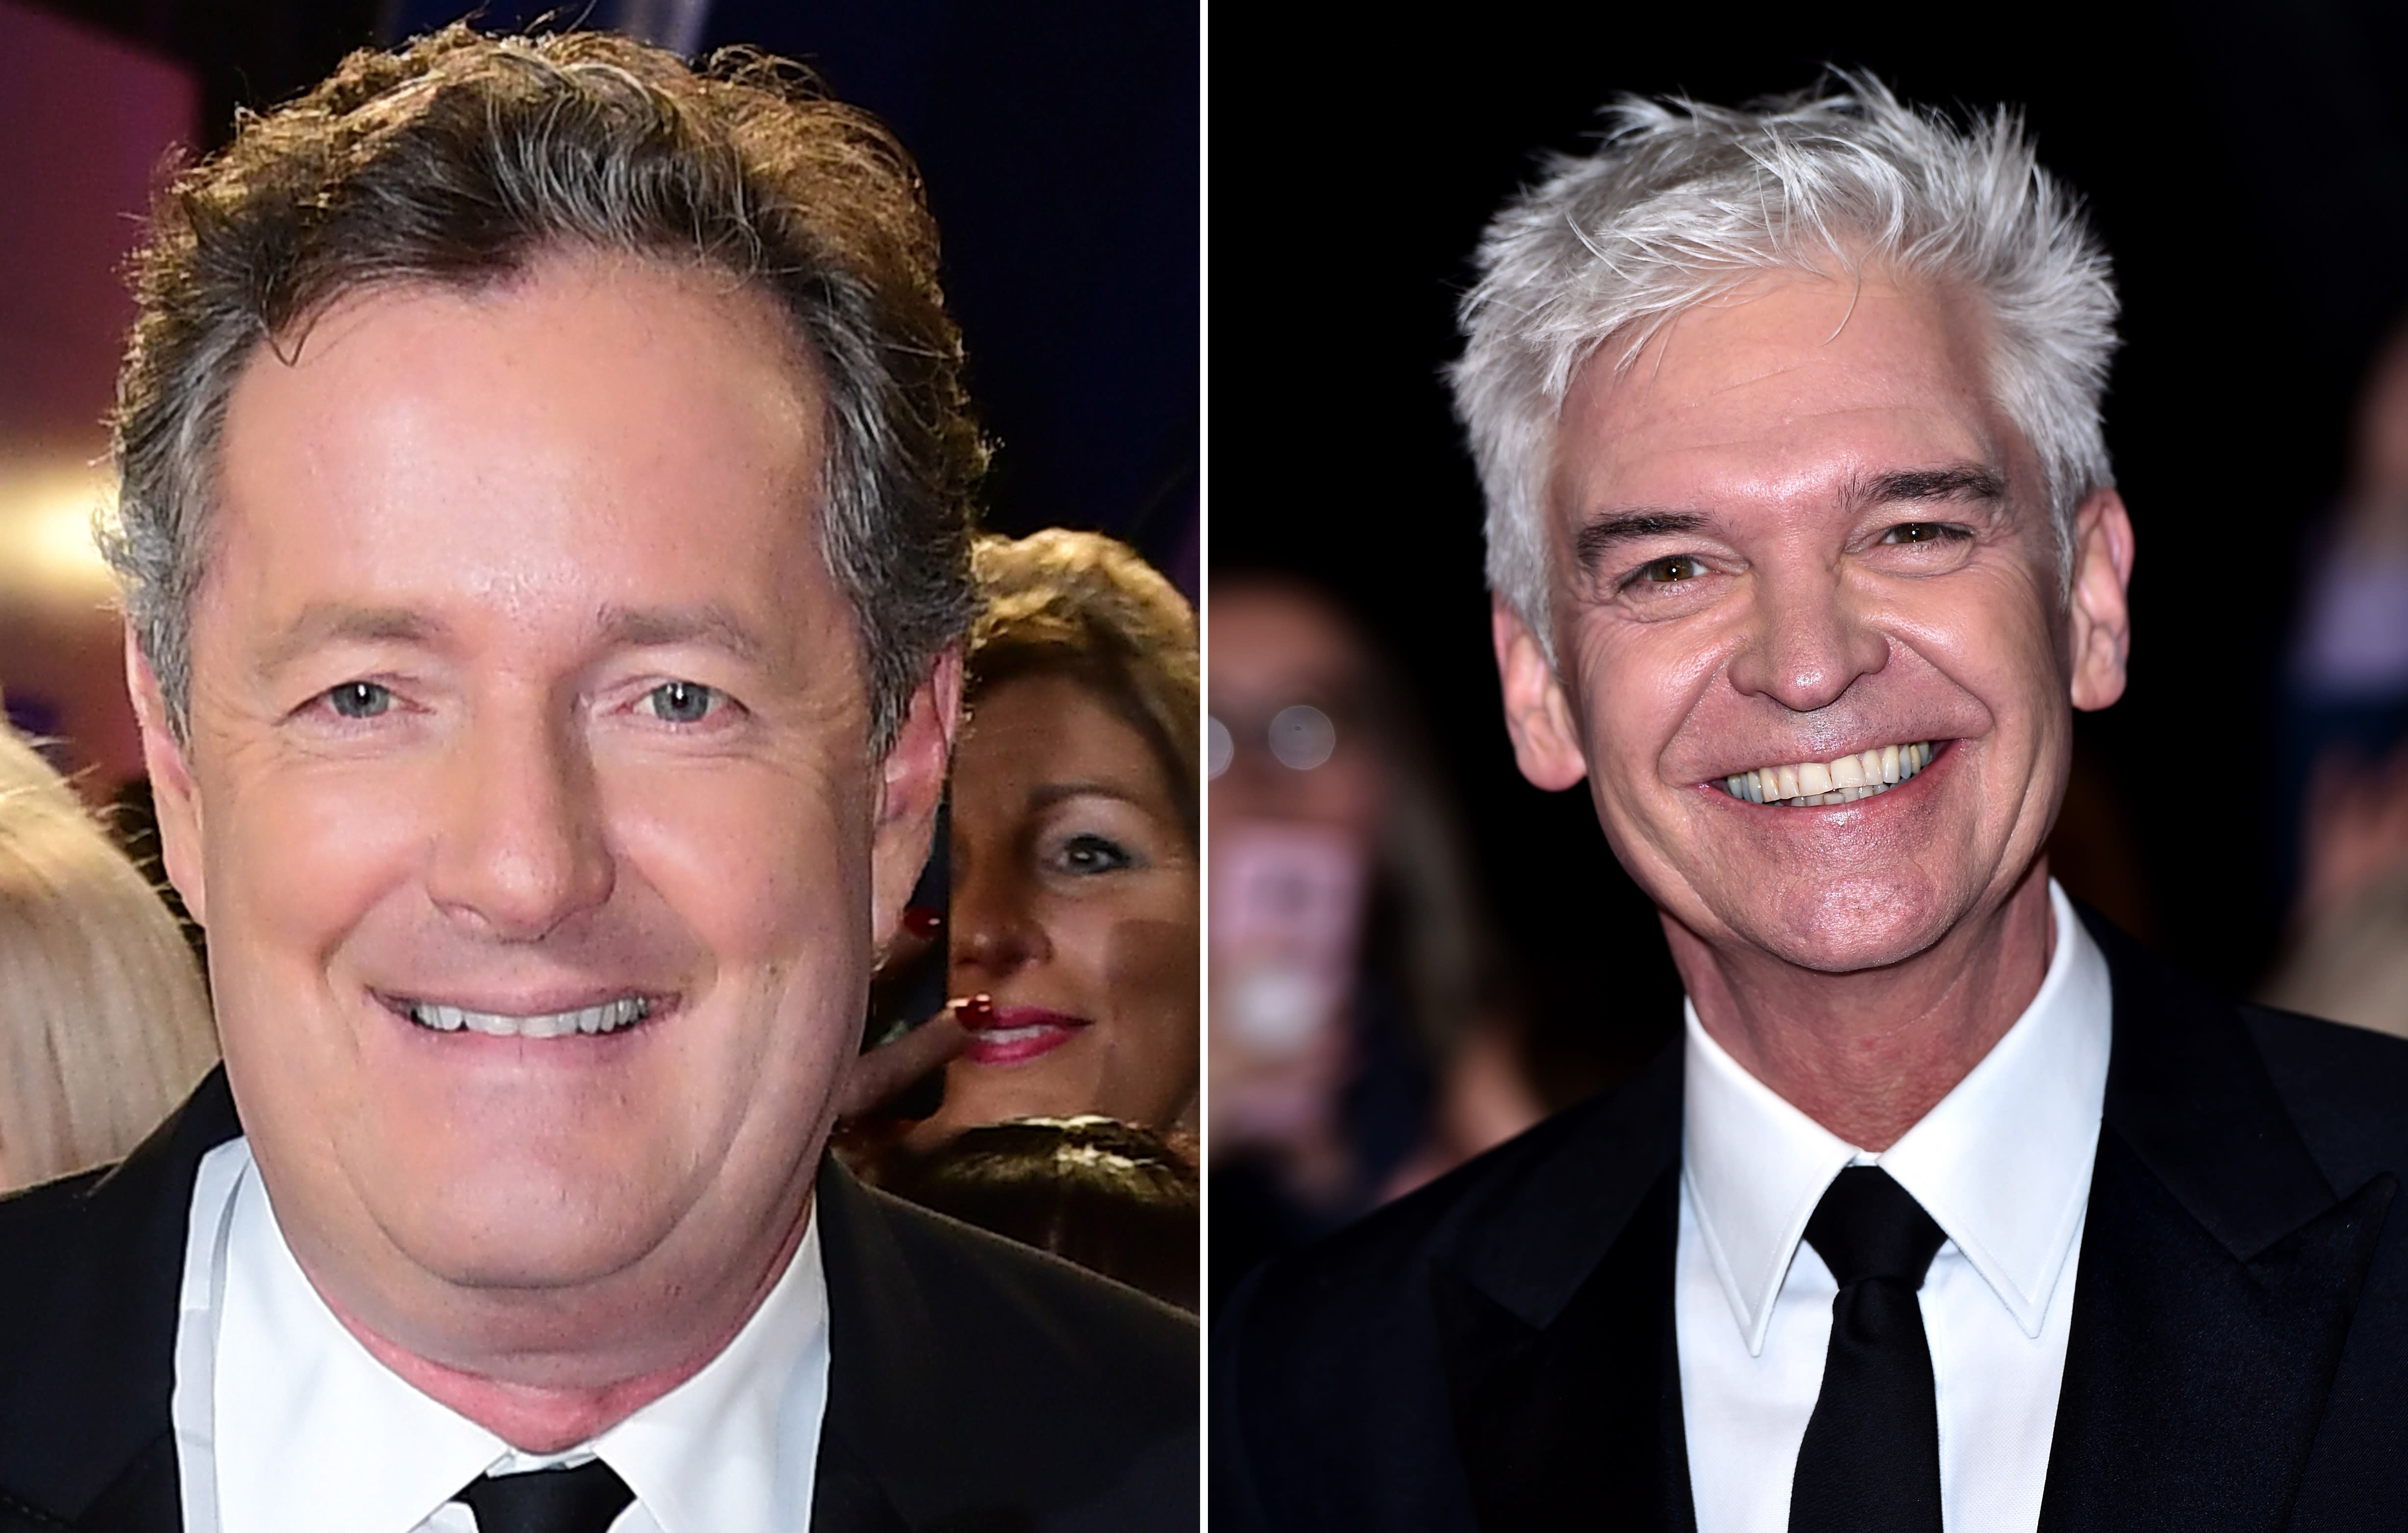 Piers Morgan and Phillip Schofield speak out against Ant McPartlin4912 x 3128